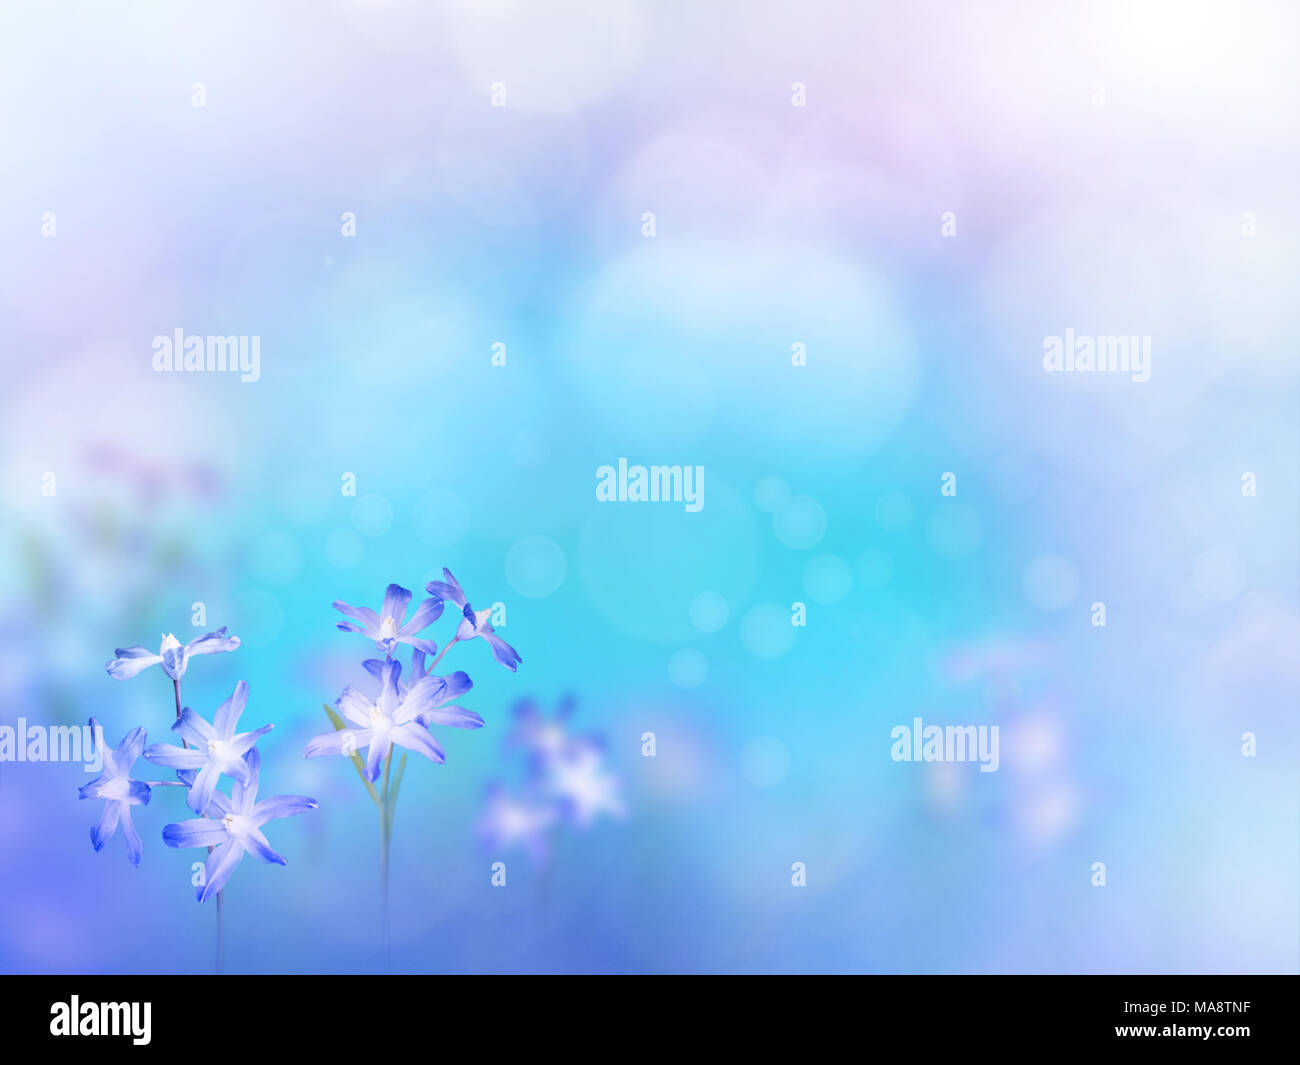 Glory of the show flowers in the corner of turquoise blurred background. Floral desktop. Blue chionodoxa early spring bloom. Stock Photo